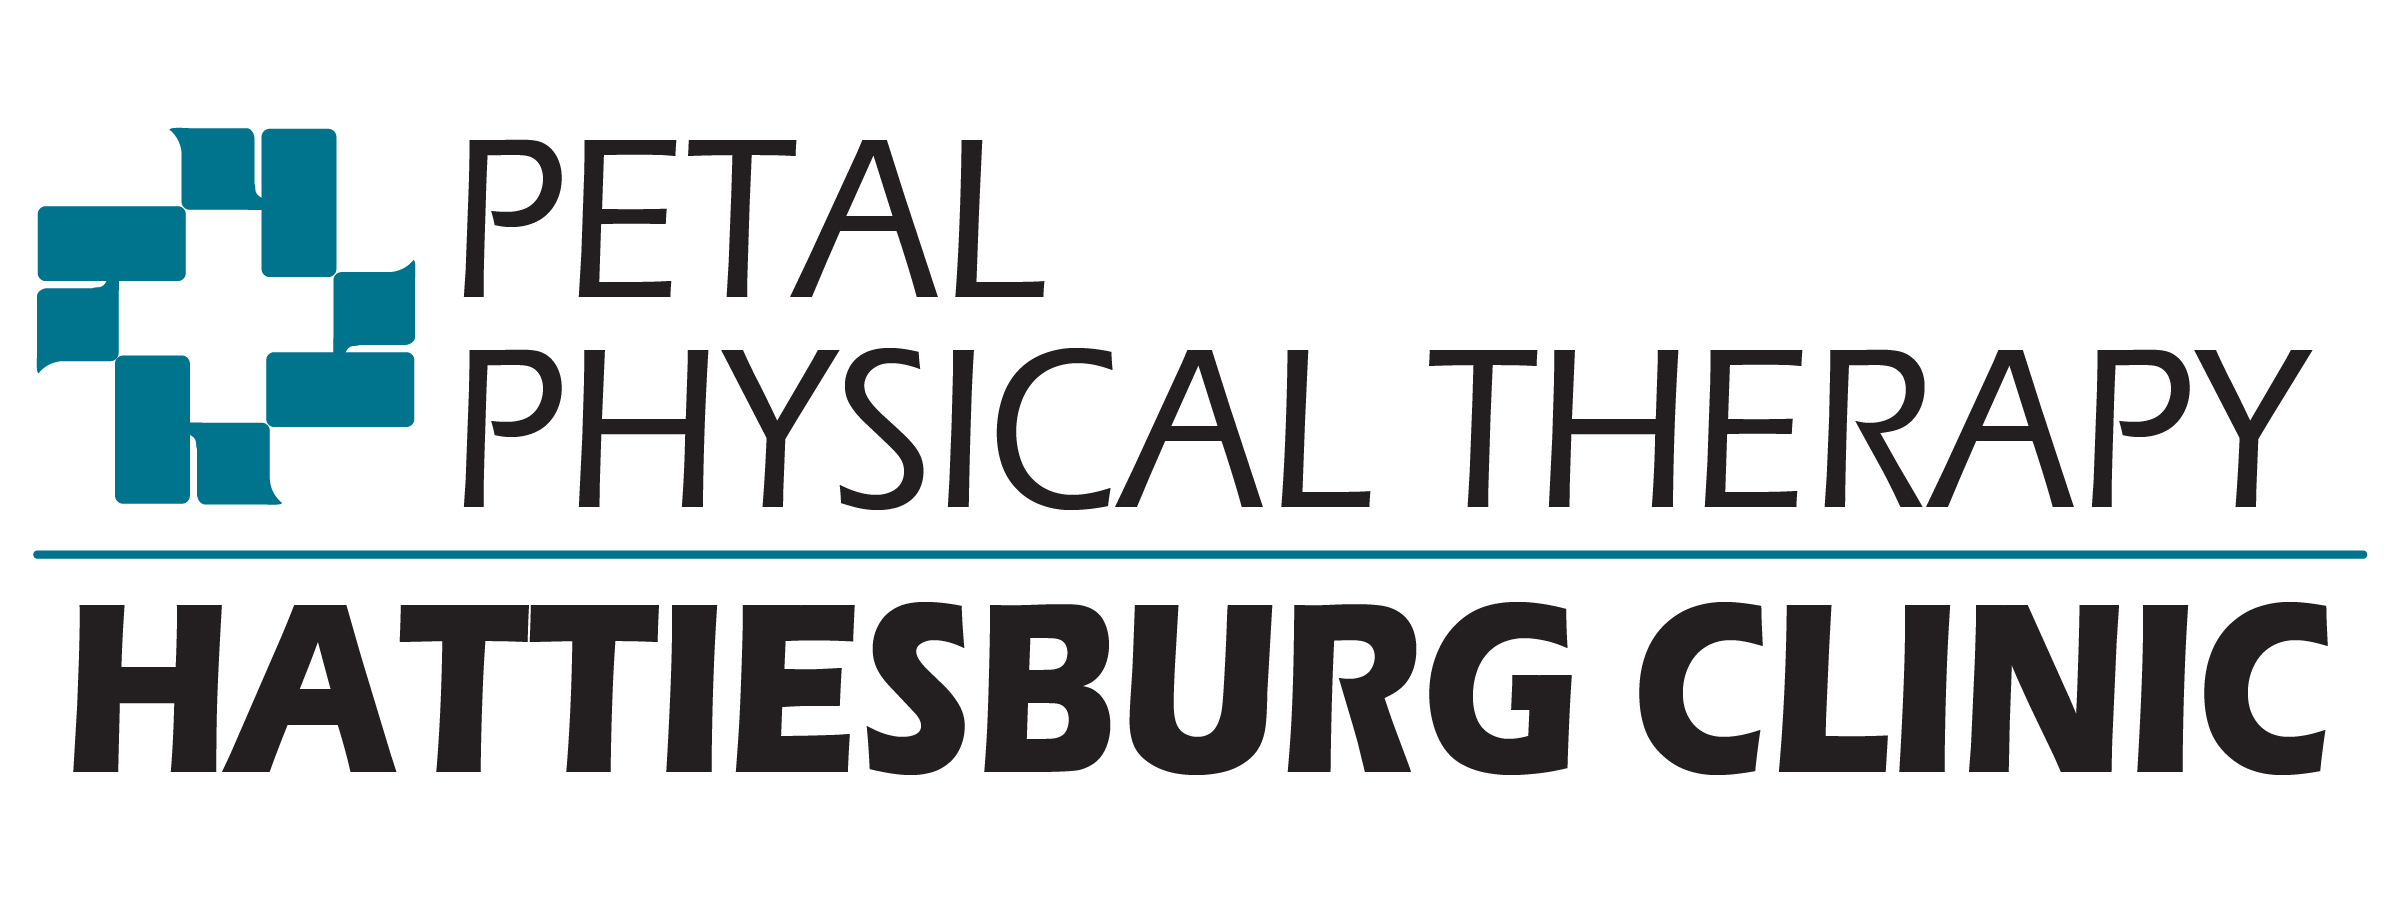 Petal Physical Therapy logo